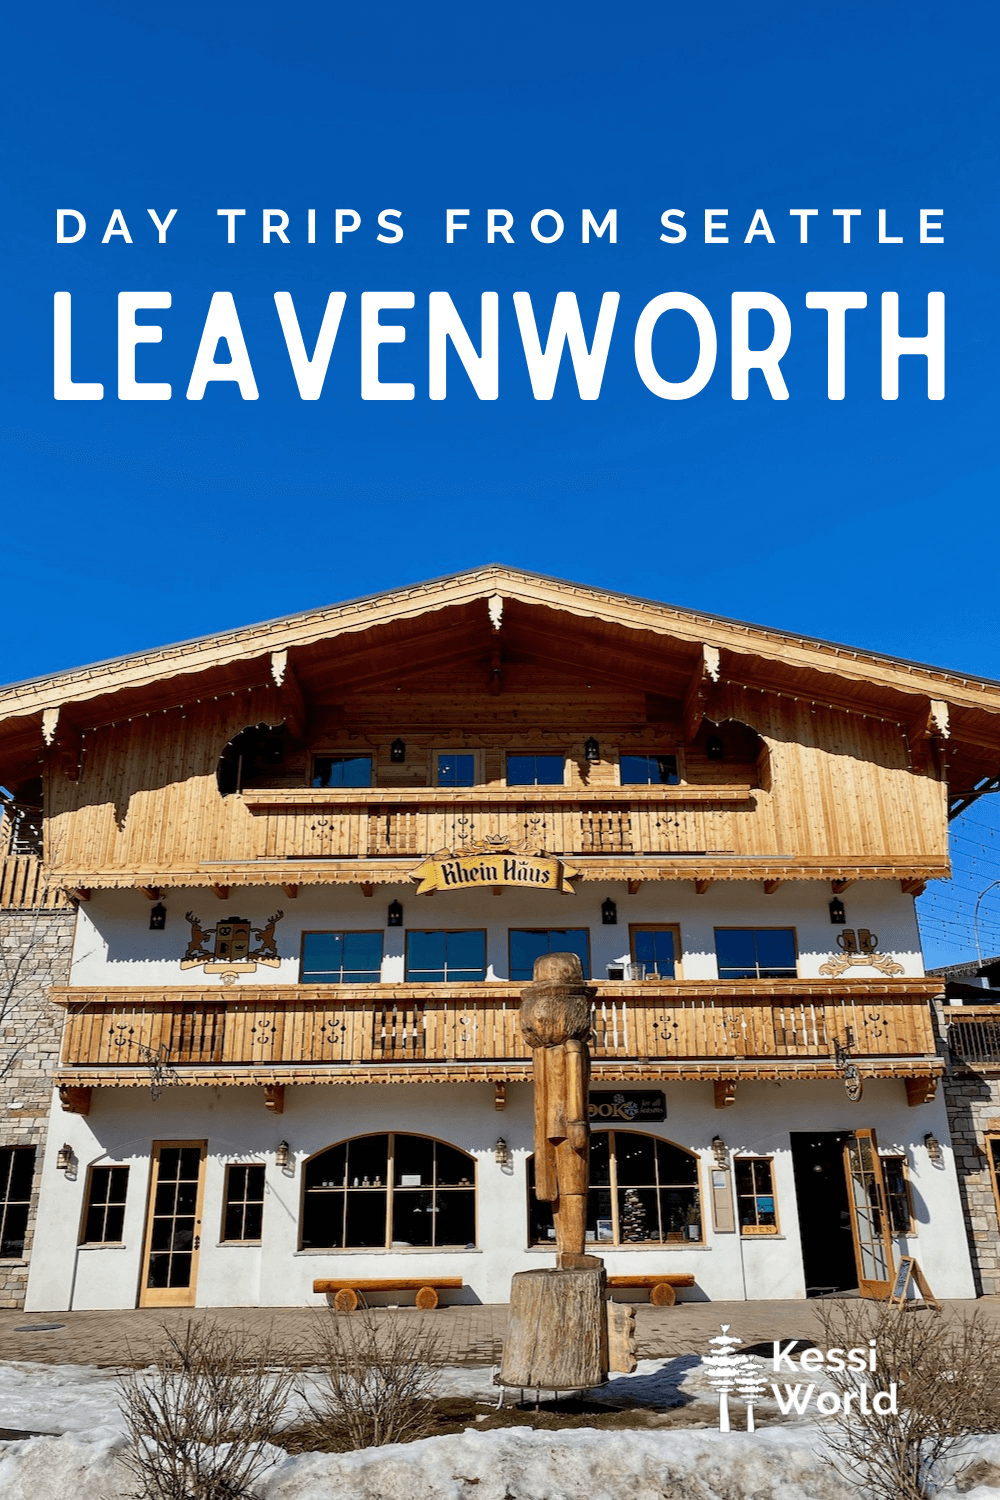 This Pinterest pin displays white letters that read "day trips from Seattle" and highlights Leavenworth. The photo shows a German chalet style building with brown woodwork and white stucco siding under a bright blue sky.